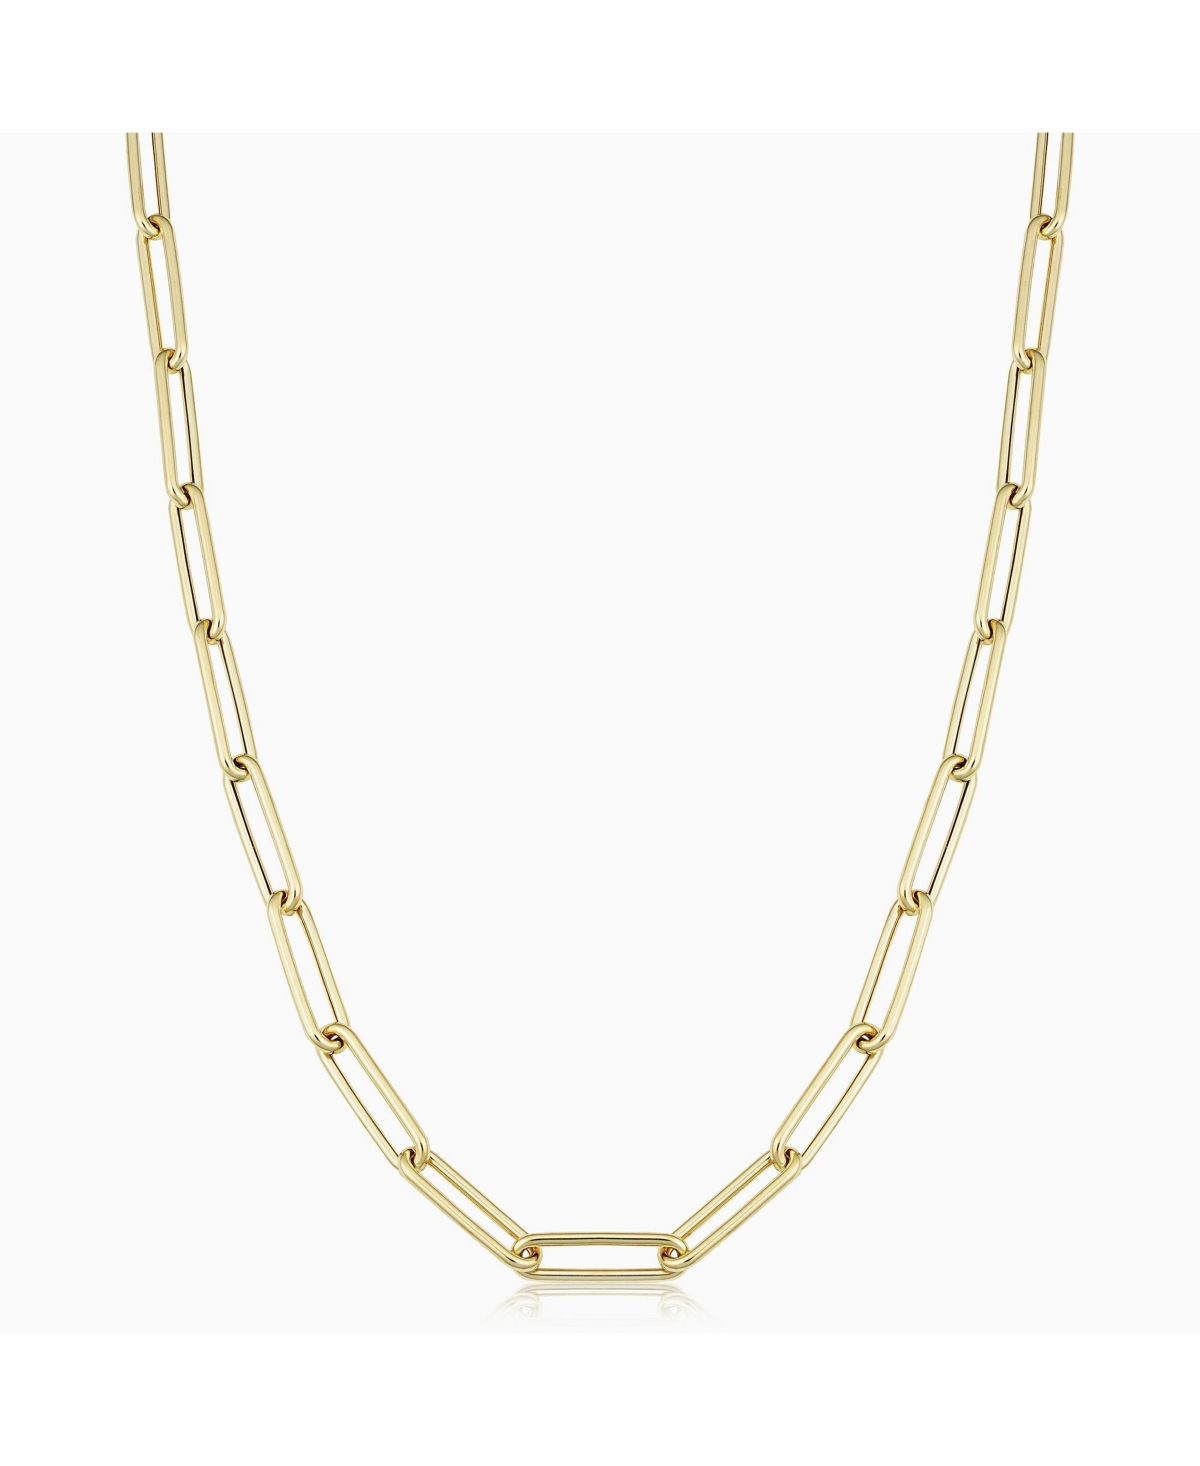 ORADINA BOND ST. NECKLACE 24" IN 14K YELLOW GOLD